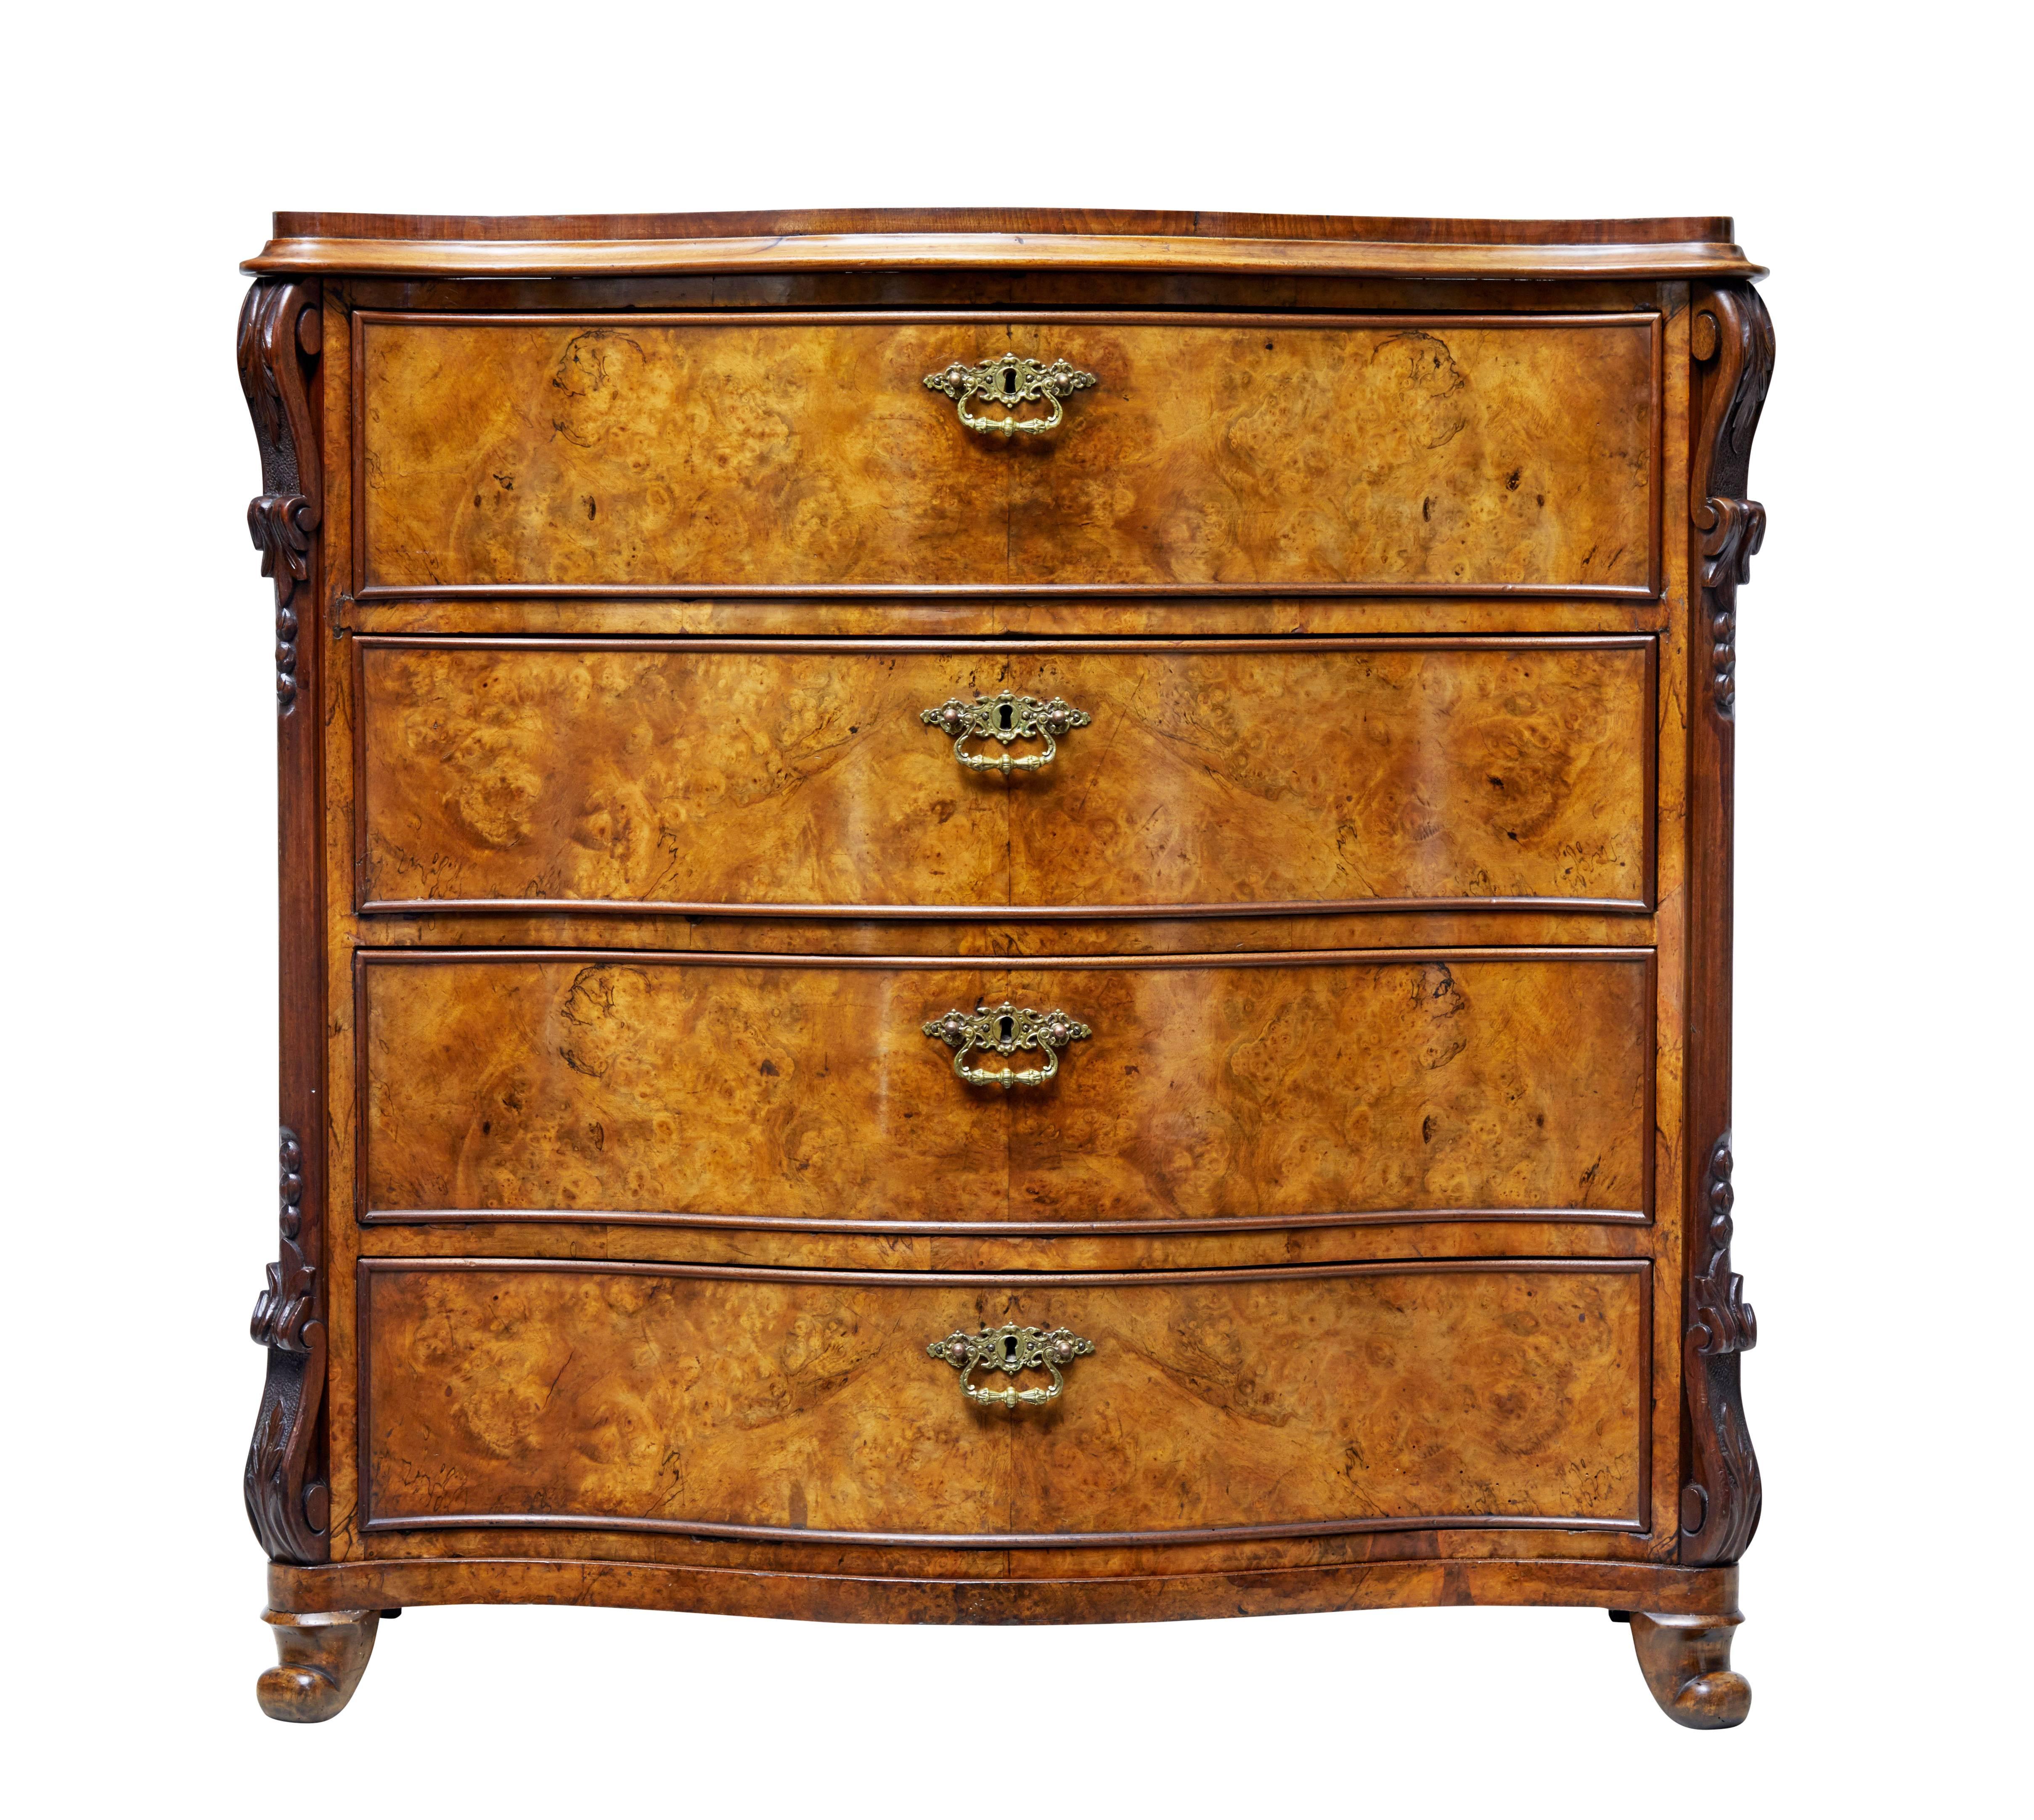 Fine mid-Victorian walnut chest of drawers, circa 1870.

Serpentine shaped front. Four drawers with beaded edging and central ornate handle. Top drawer fitted with slide compartments.

Carved decorative scrolls to the canted corners.

Good